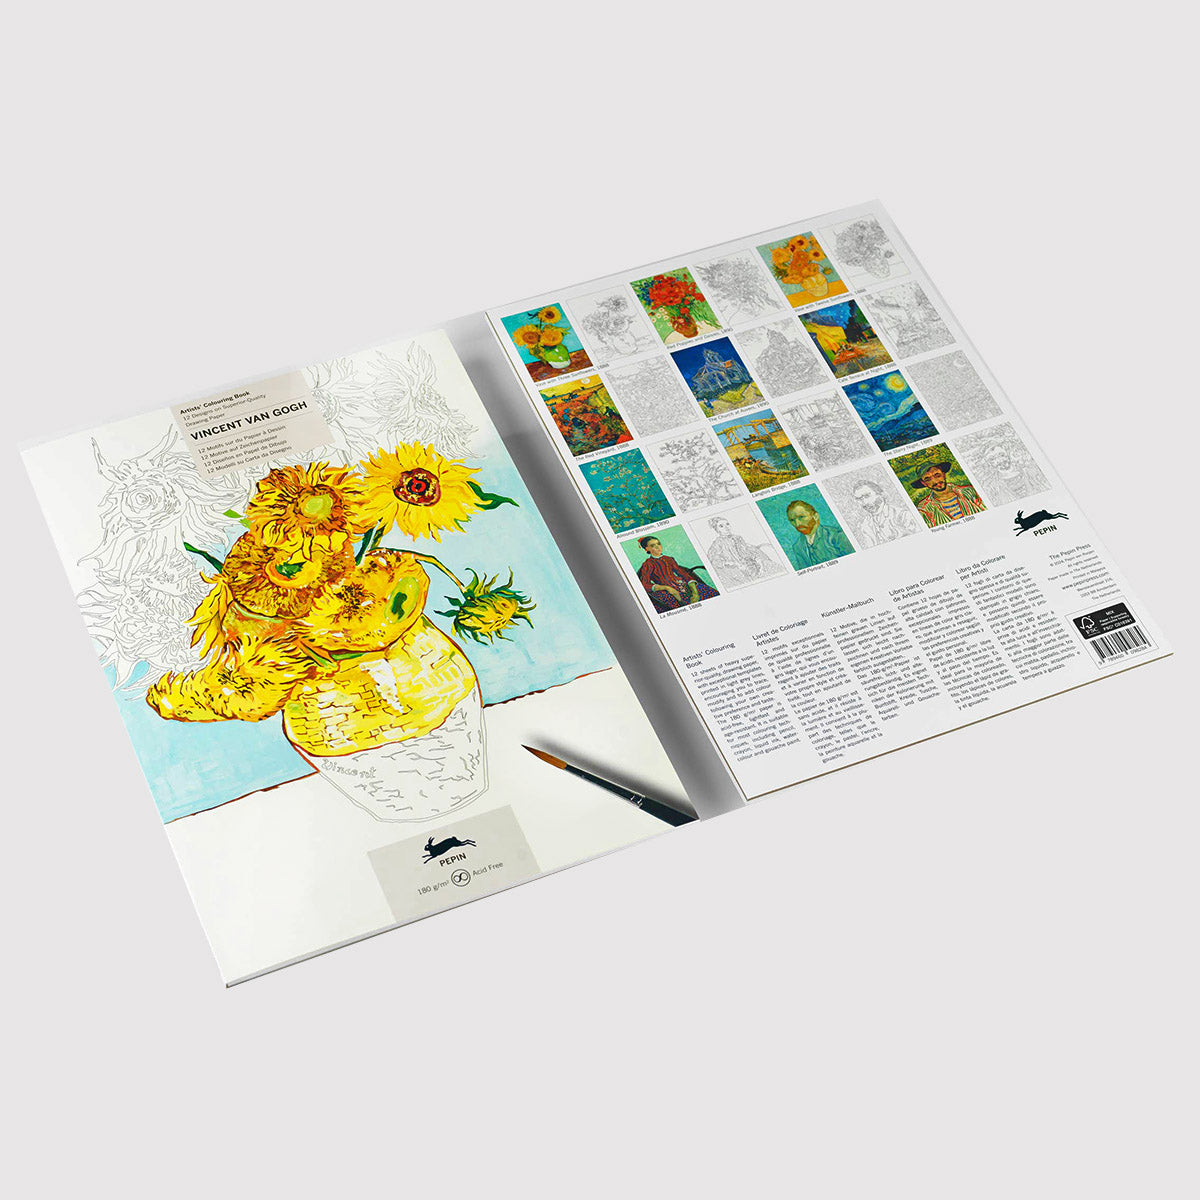 Van Gogh Dreams: A Vincent Van Gogh Inspired 16 Page Professional Colouring Experience